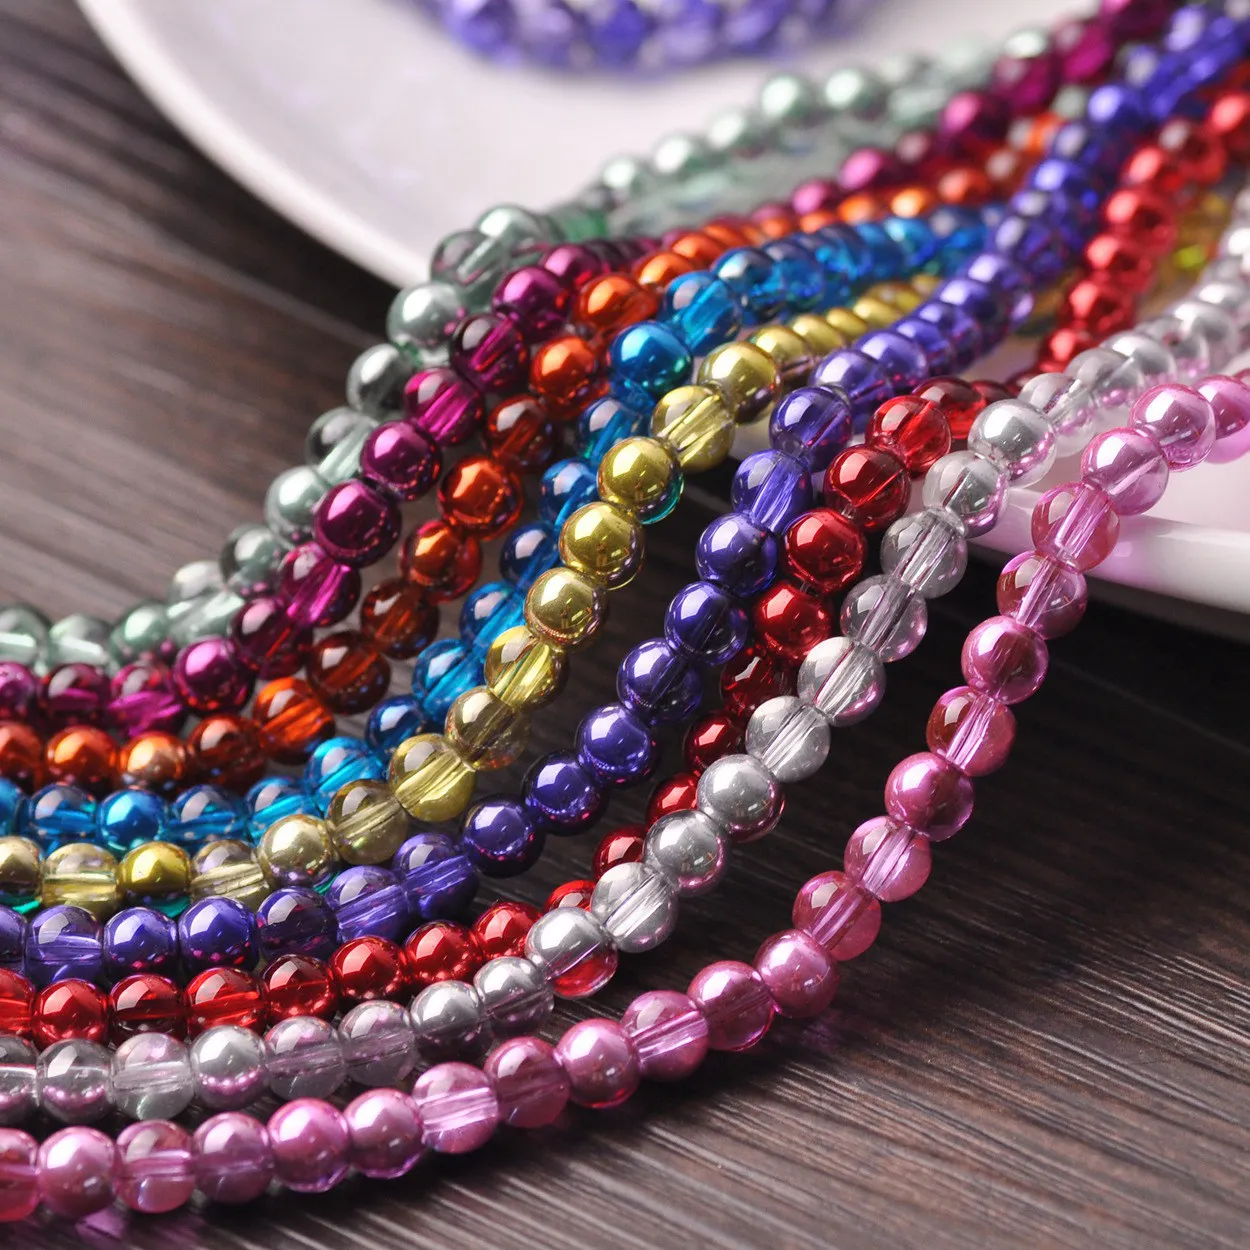 4mm/6mm/8mm crystal loose spacer beads for jewelry making neckless finding lot 